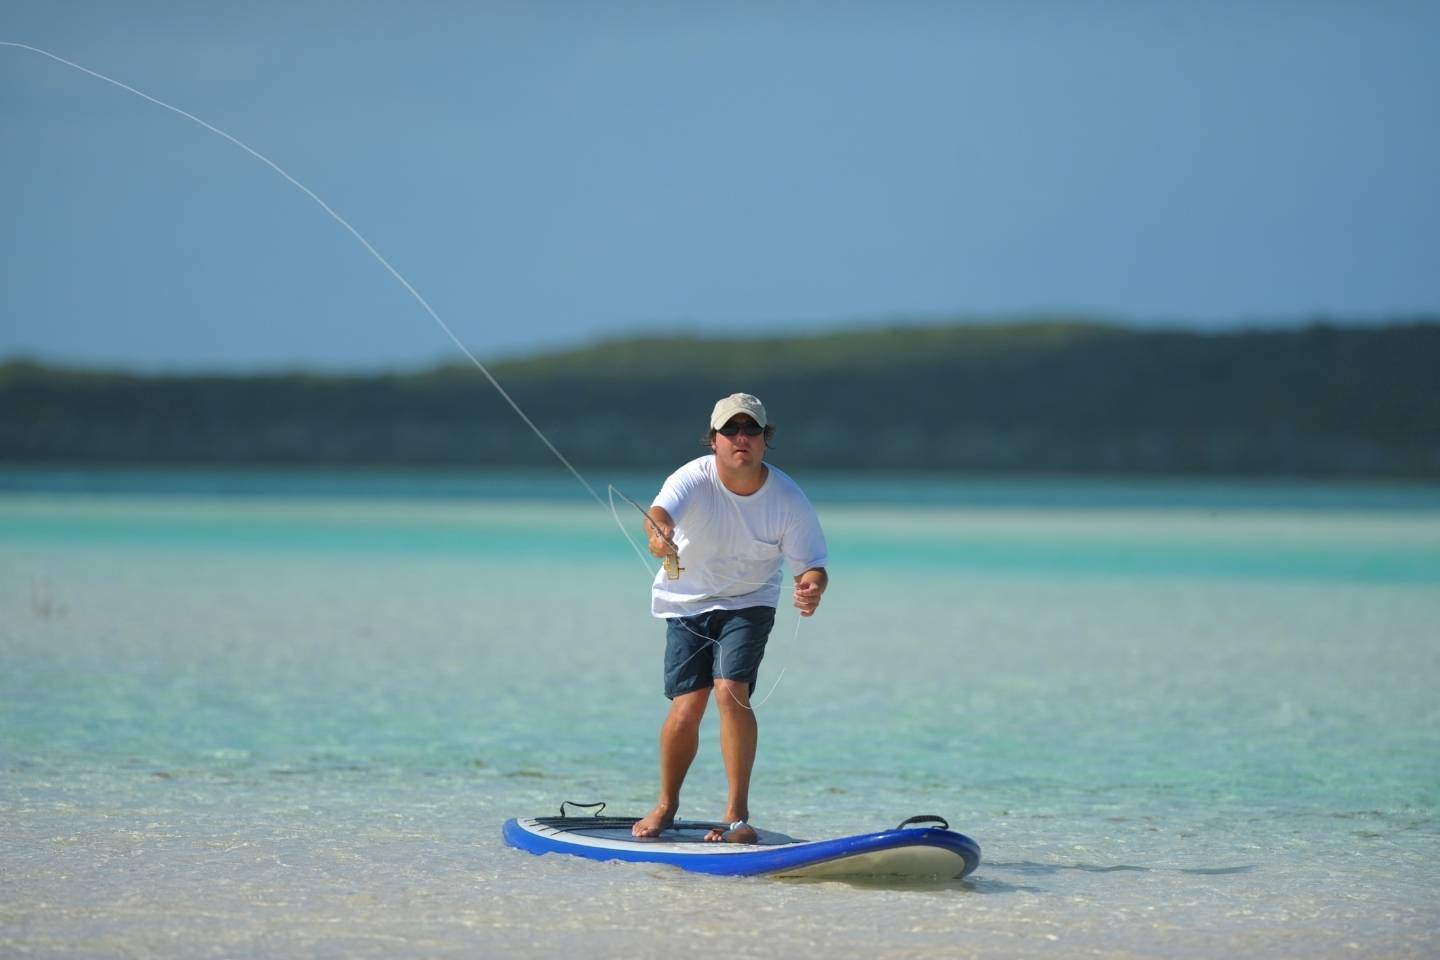 A man in white on paddle board with fishing gear